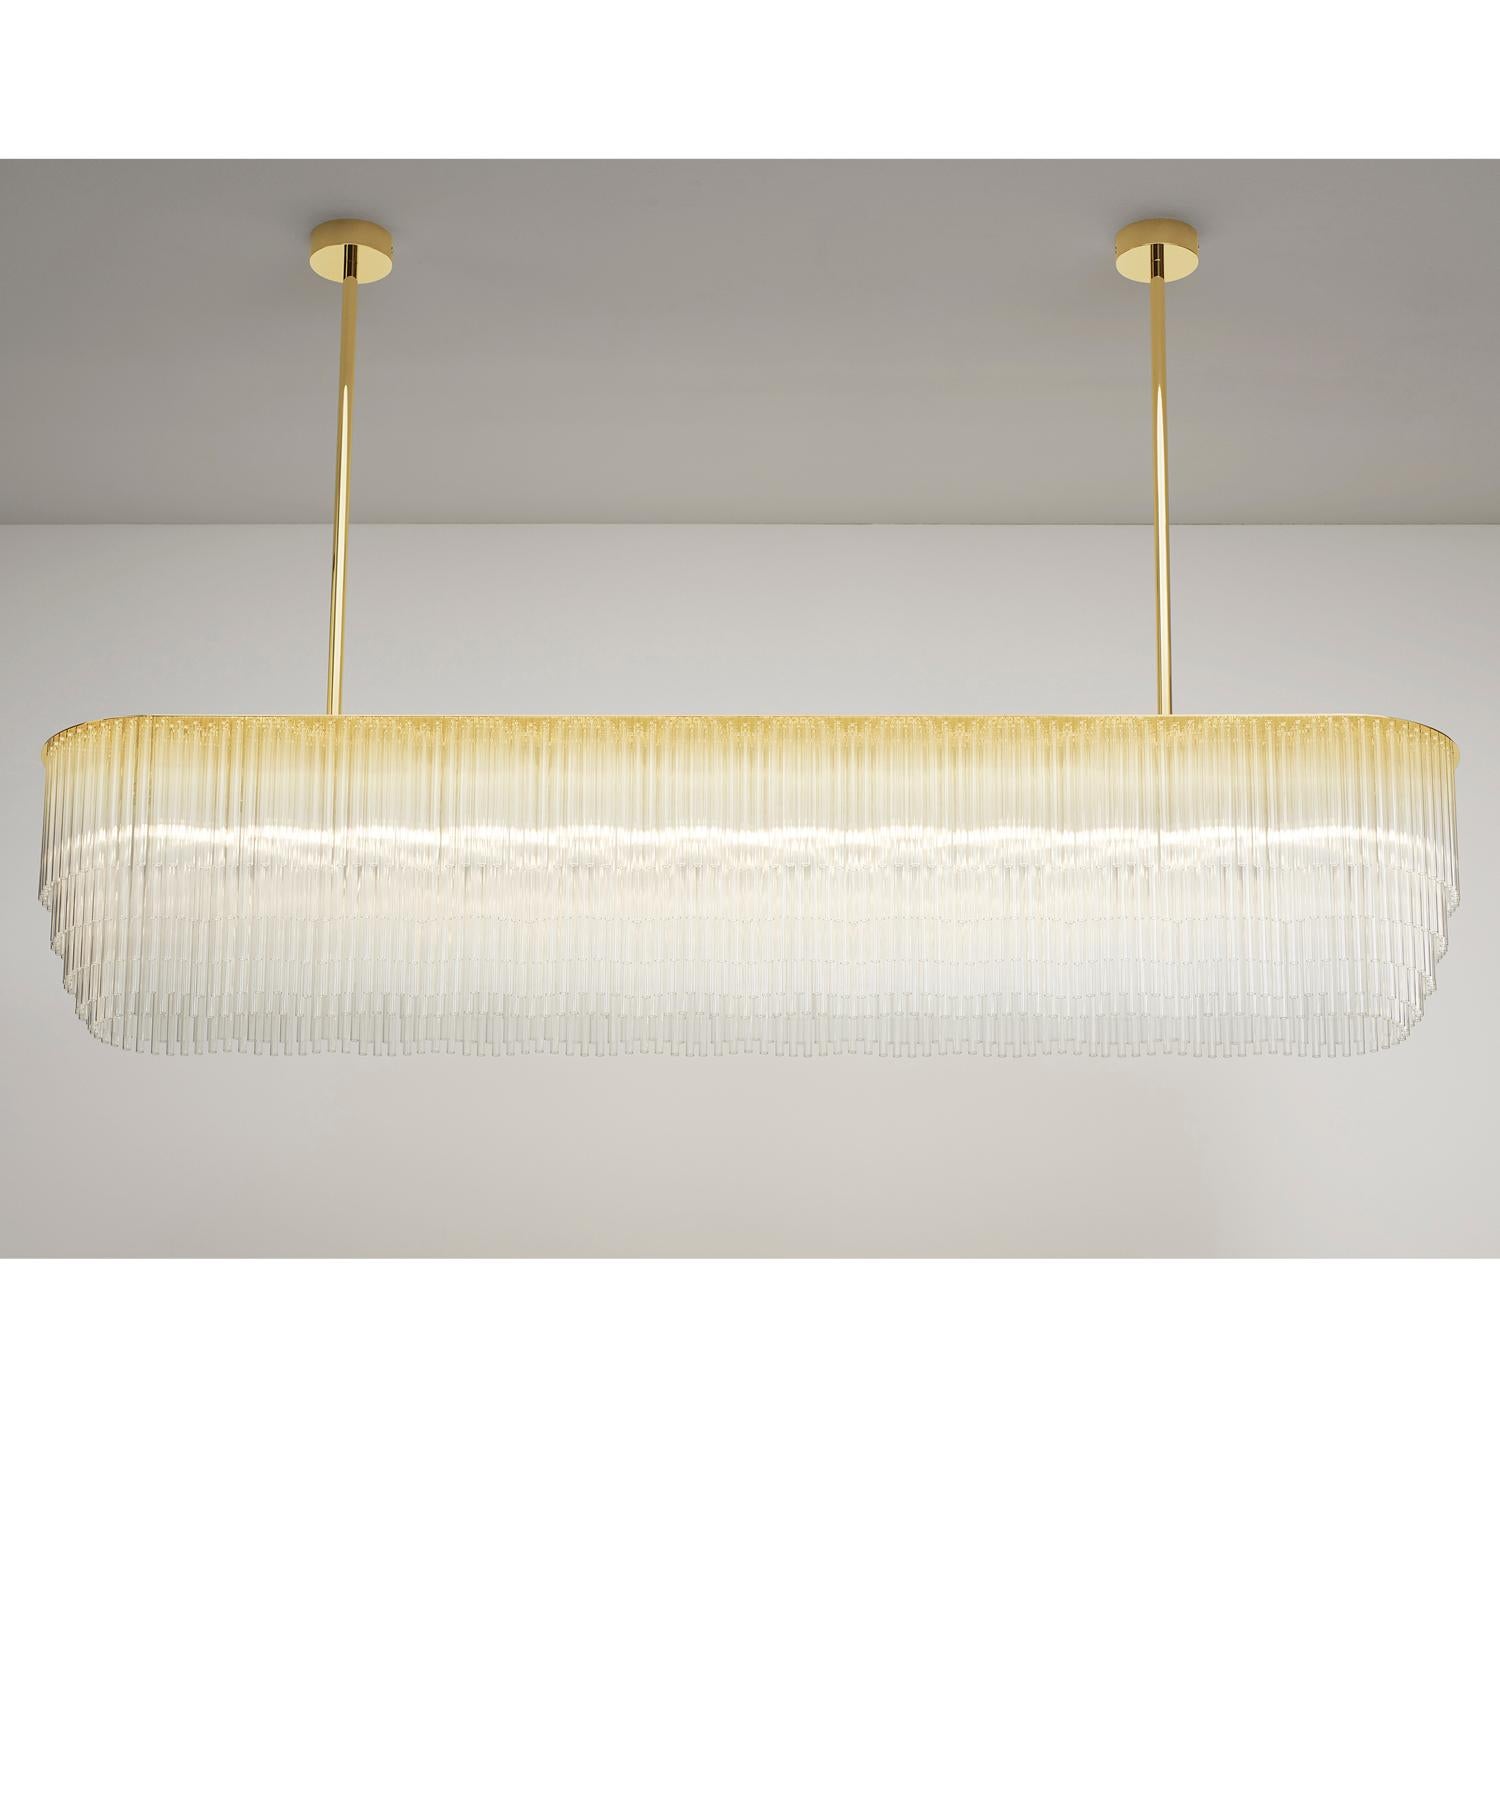 The Linear Chandelier, with its distinguished tiered-glass profile is the perfect solution for interiors that require a contemporary and functional source of light. It sits beautifully when suspended over dining tables or as a decorative accent in a